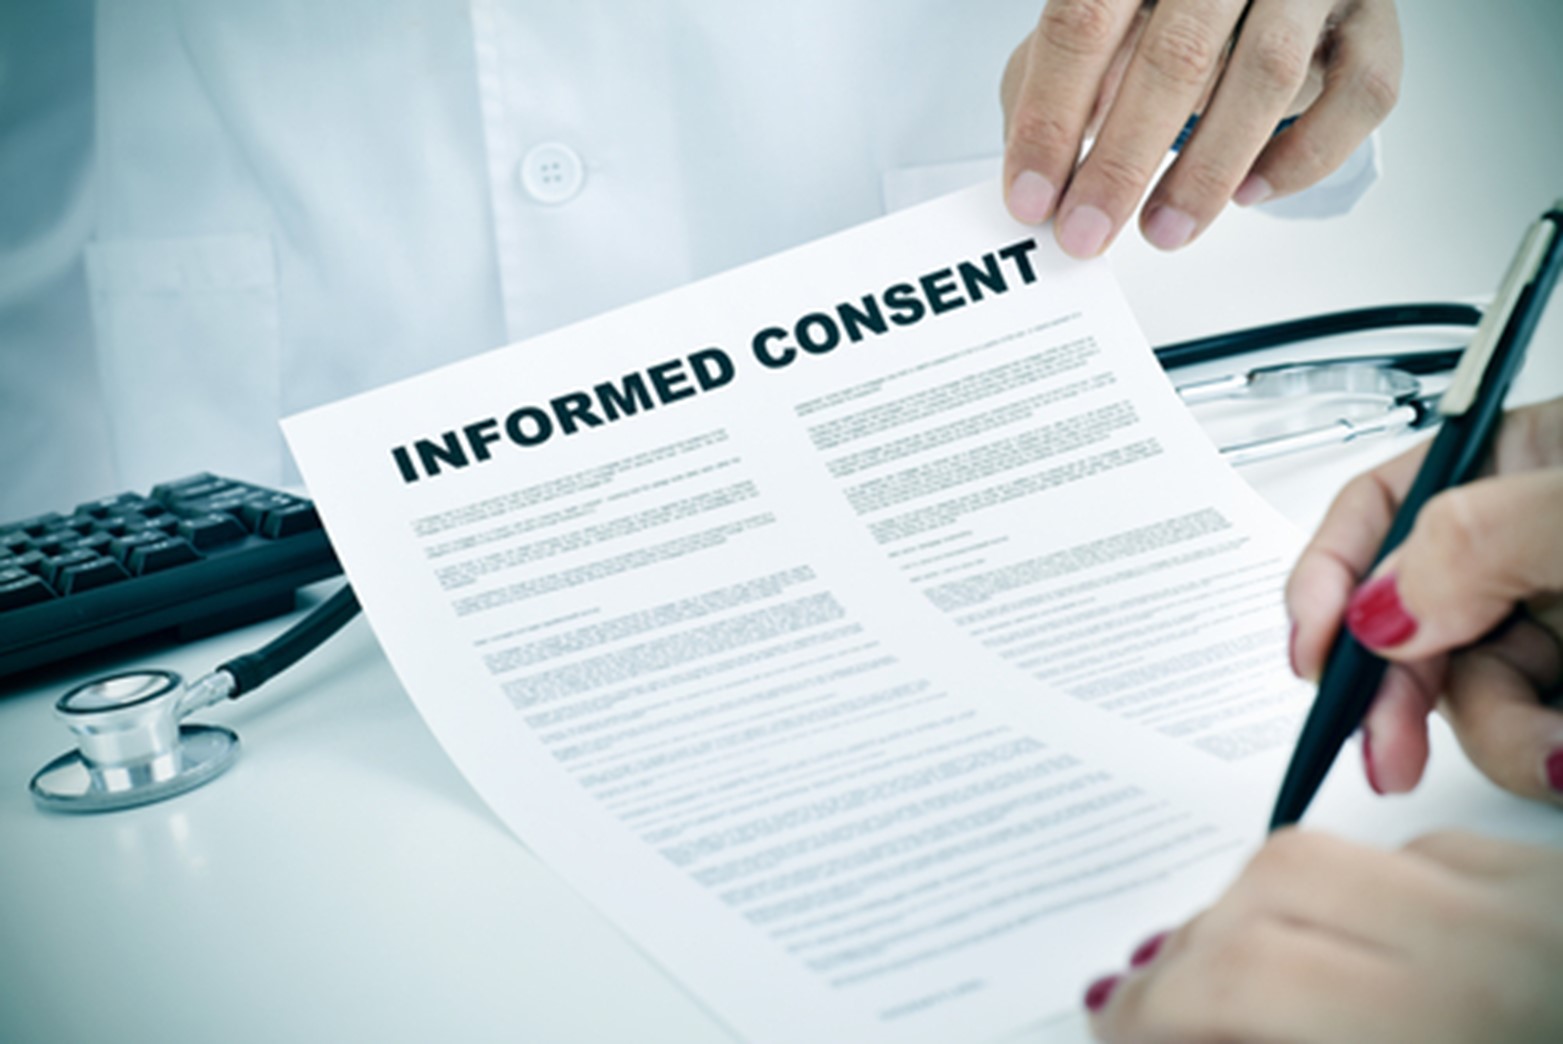 Informed consent in data collection